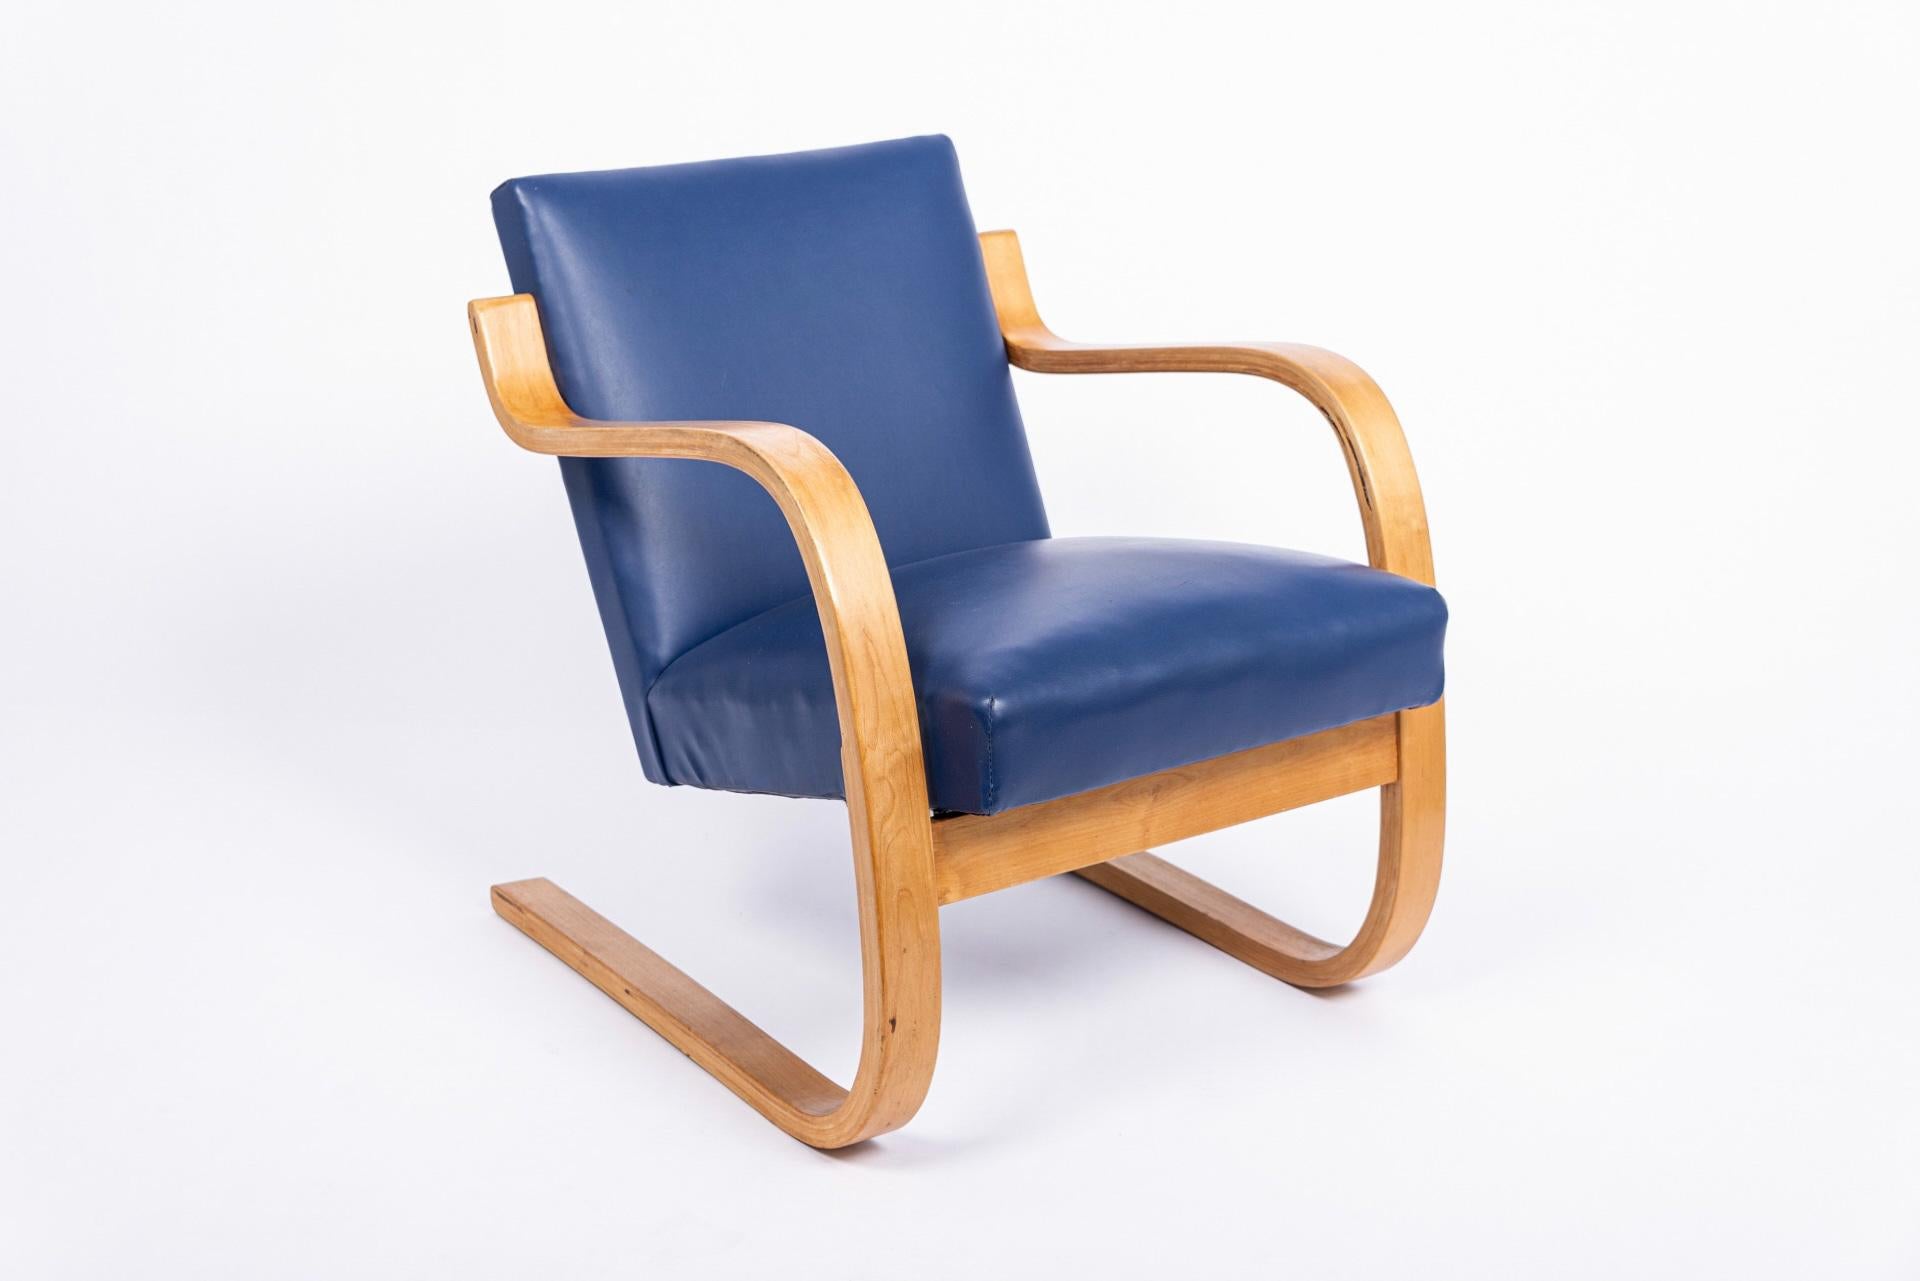 The Model 402 lounge chair or ‘Atelje’ chair was designed by Alvar and Aino Aalto in 1933 for and is considered a masterpiece of modernist furniture design. The Classic, well-balanced design features graceful, sculptural lines. The inventive